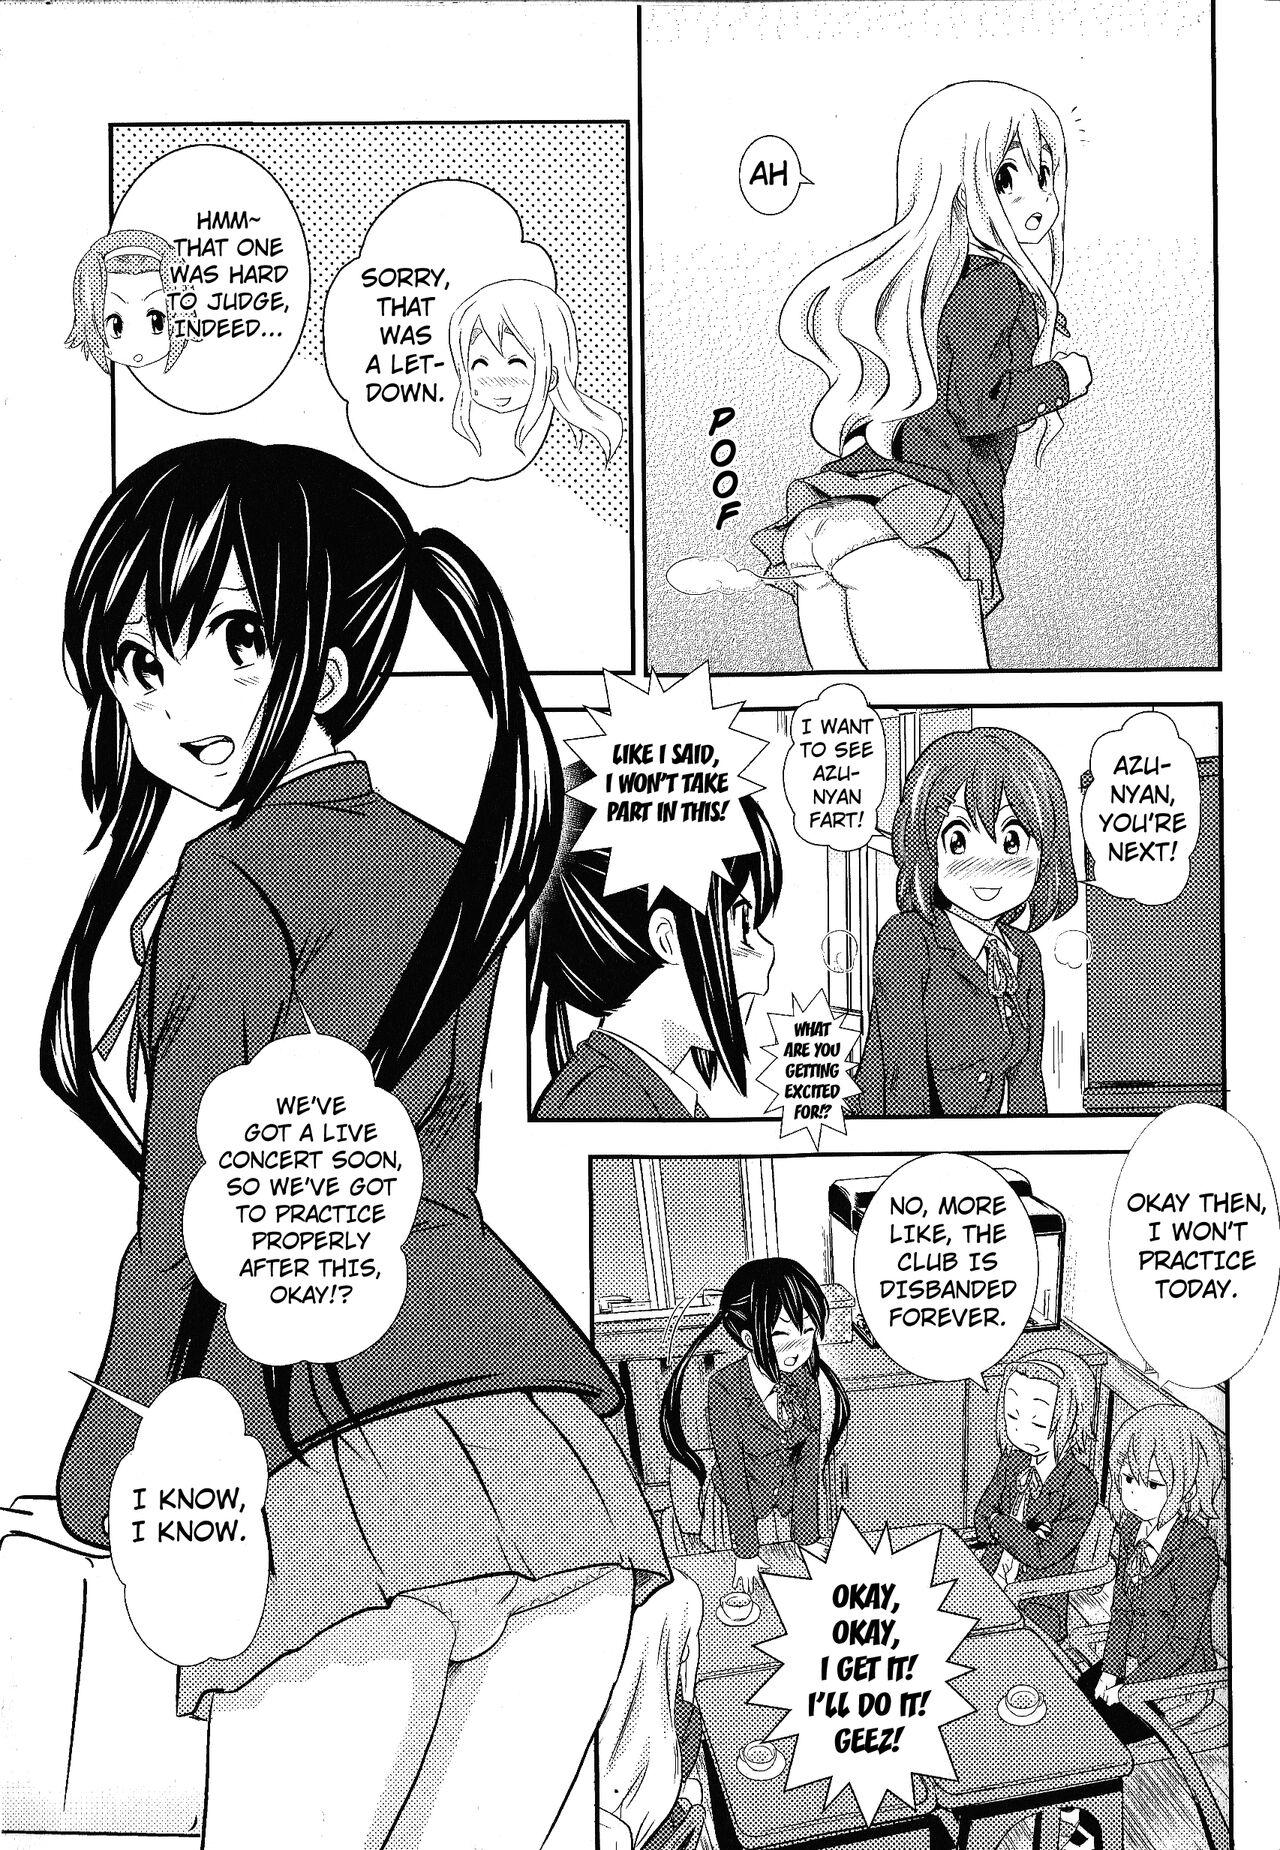 Best Blow Jobs Ever Houkago Unchi Time Best | Best of After School Poop Time - K on Thuylinh - Page 4